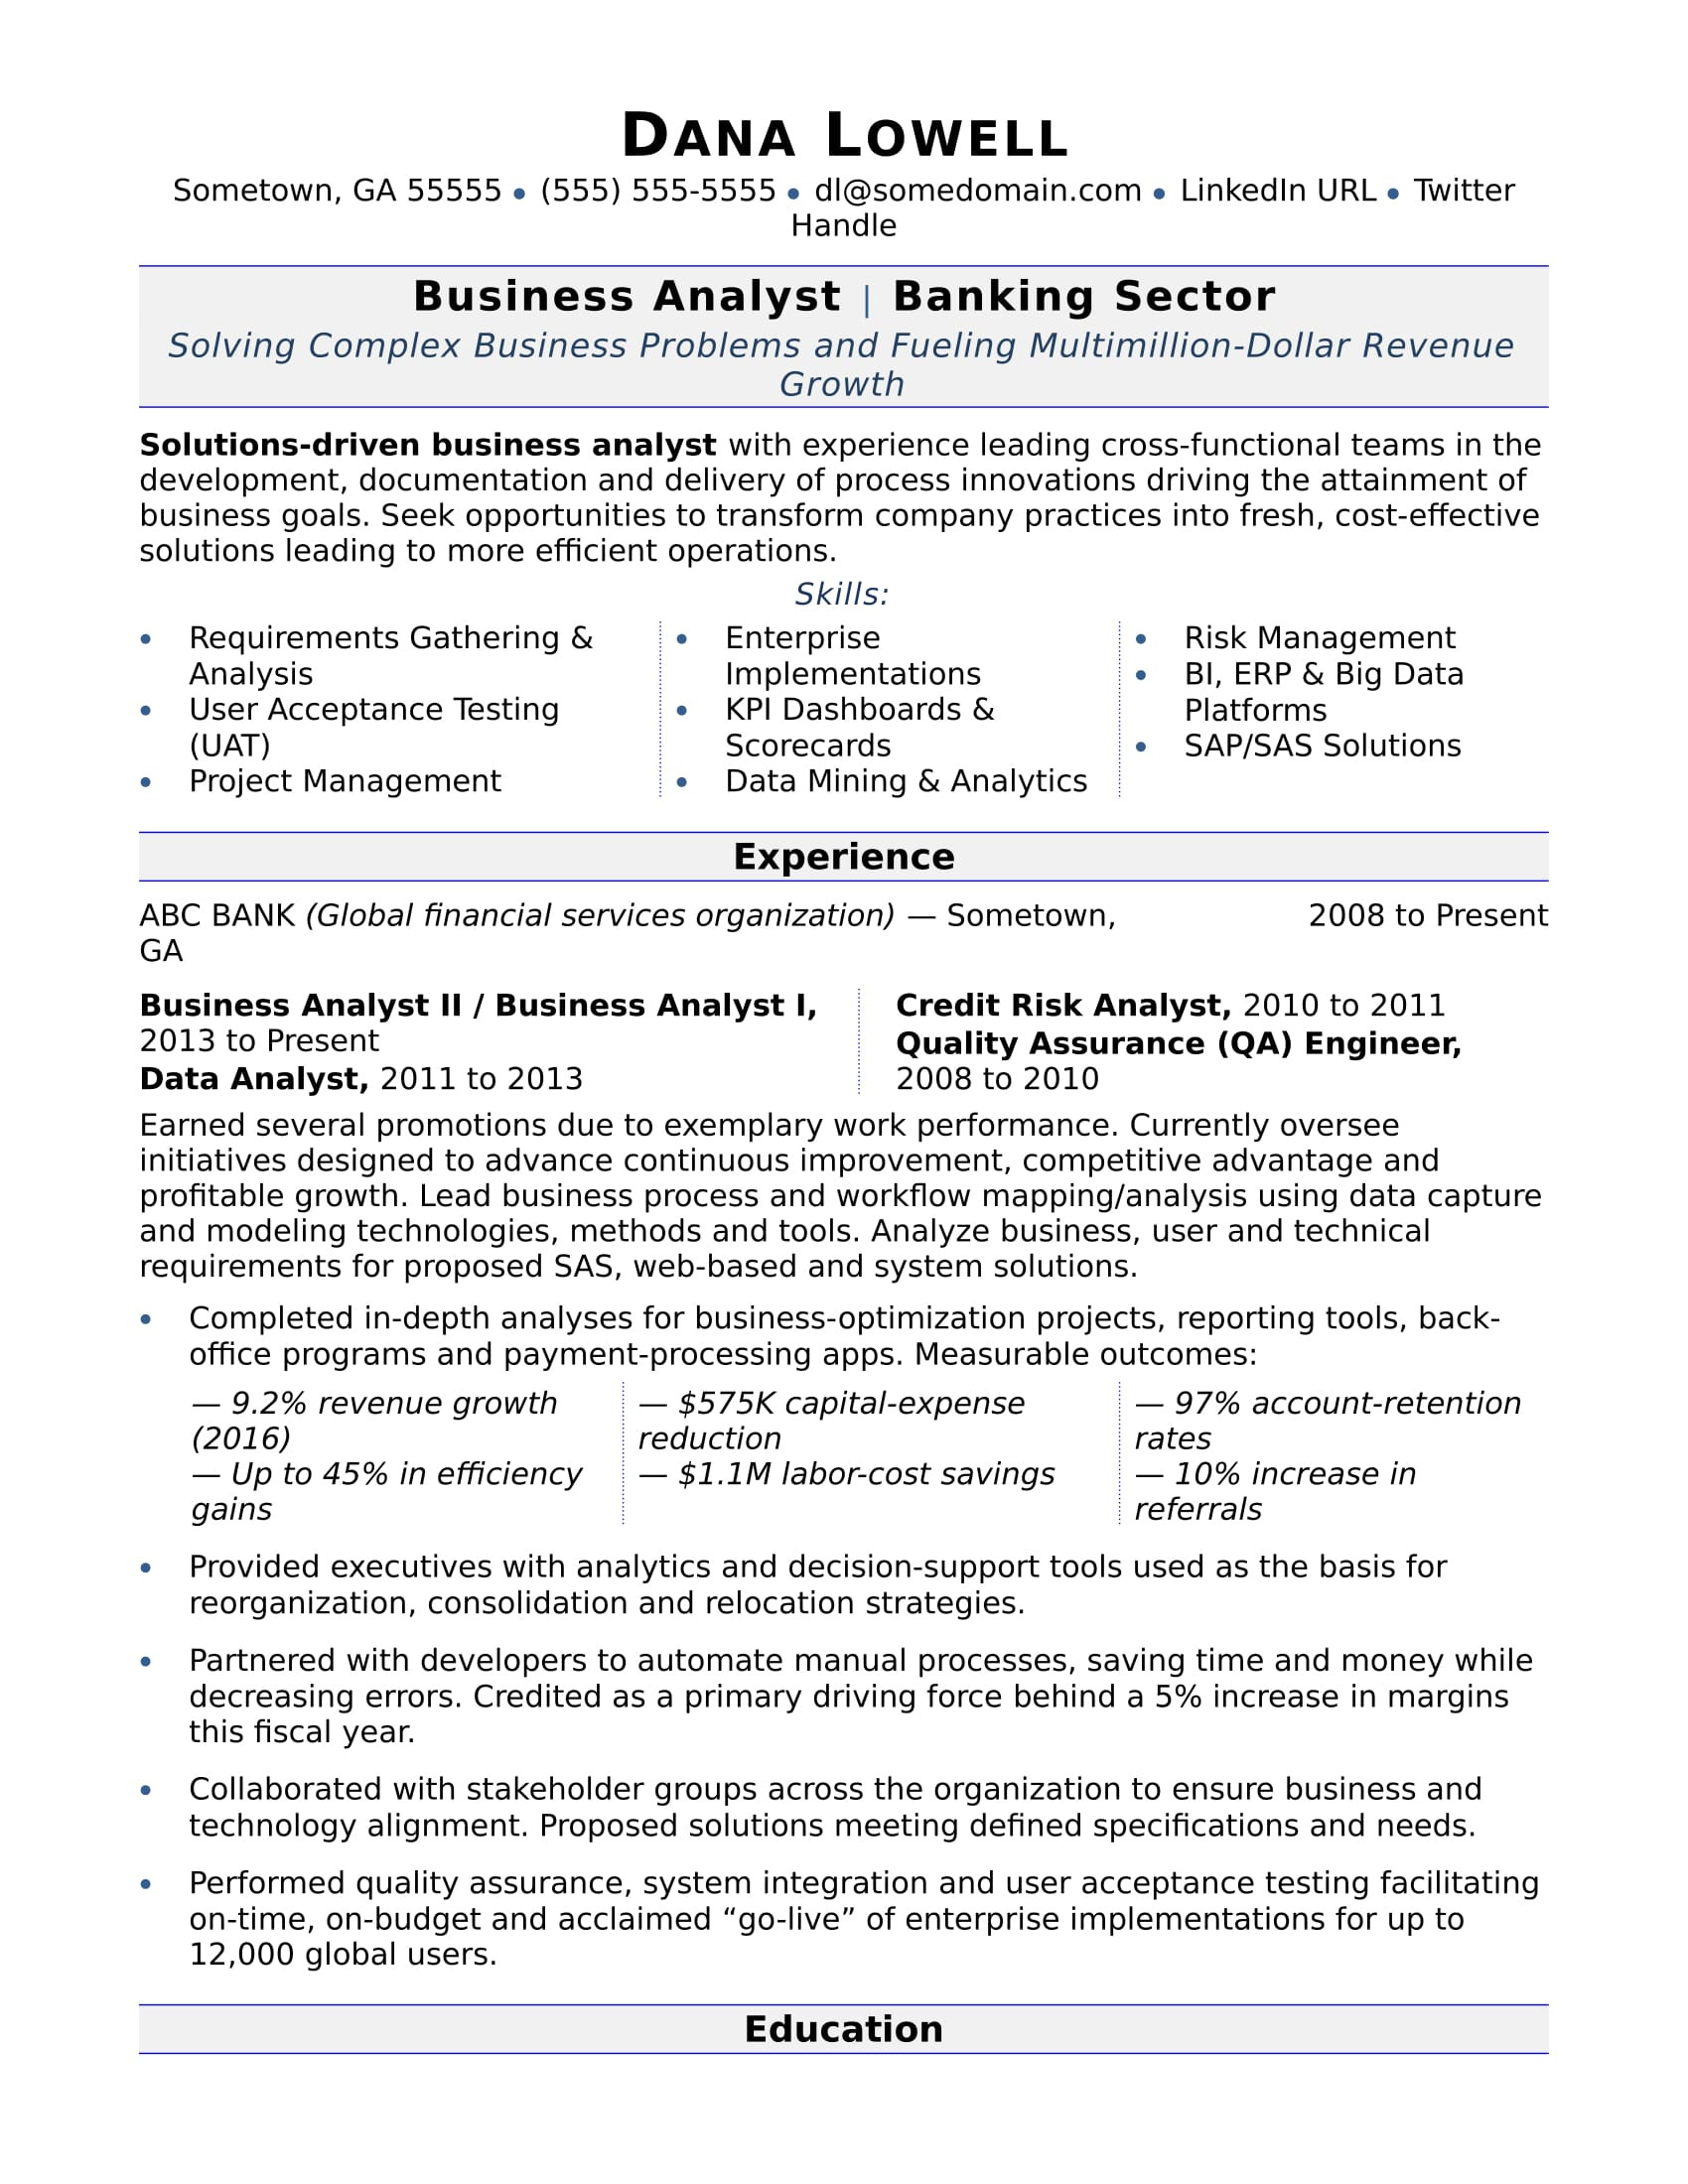 Web Services Business Analyst Sample Resume Business Analyst Resume Monster.com